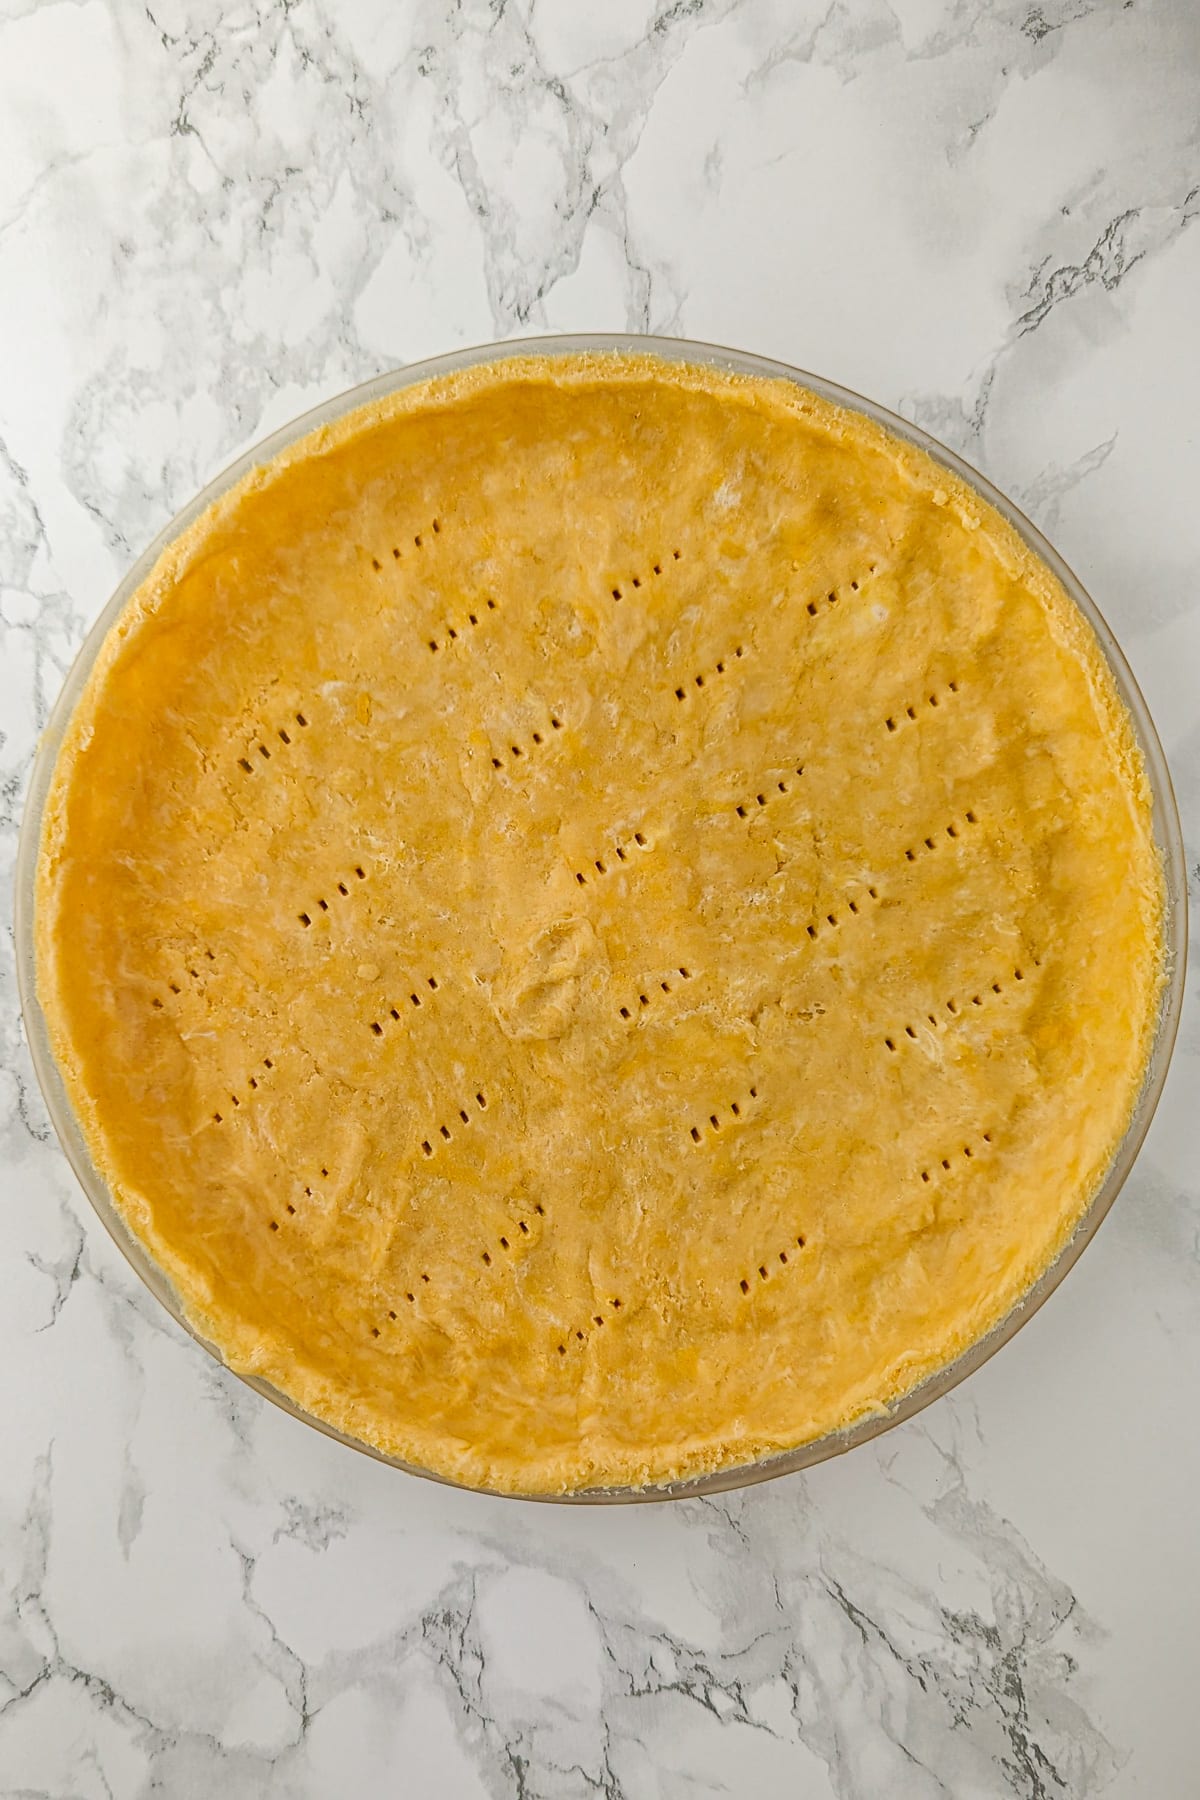 Unbaked homemade quiche dough in a glass pie dish on a marble countertop, with a pattern of fork pricks on the crust indicating it's ready to bake.